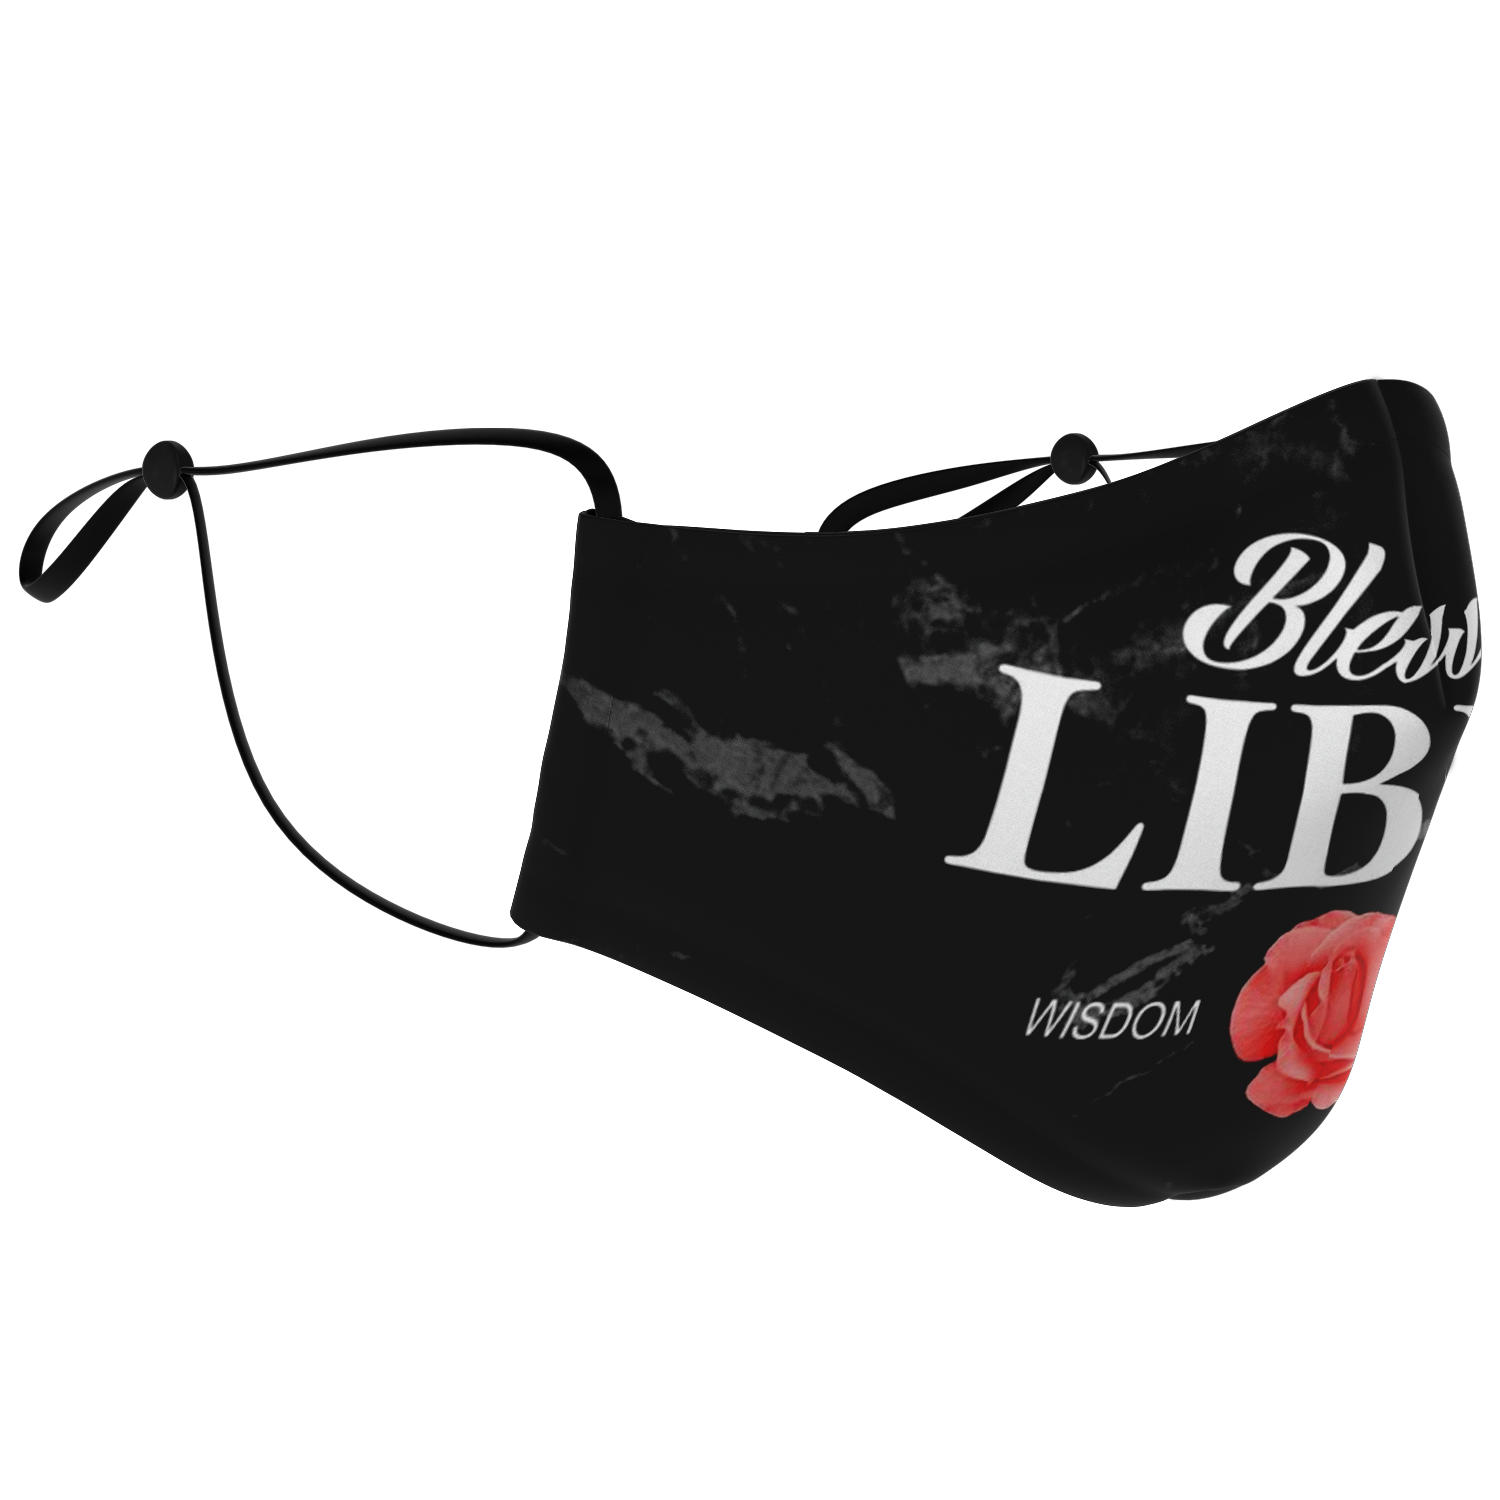 Blessed Libra Face Mask - Black Renegade - - Loyalty Vibes